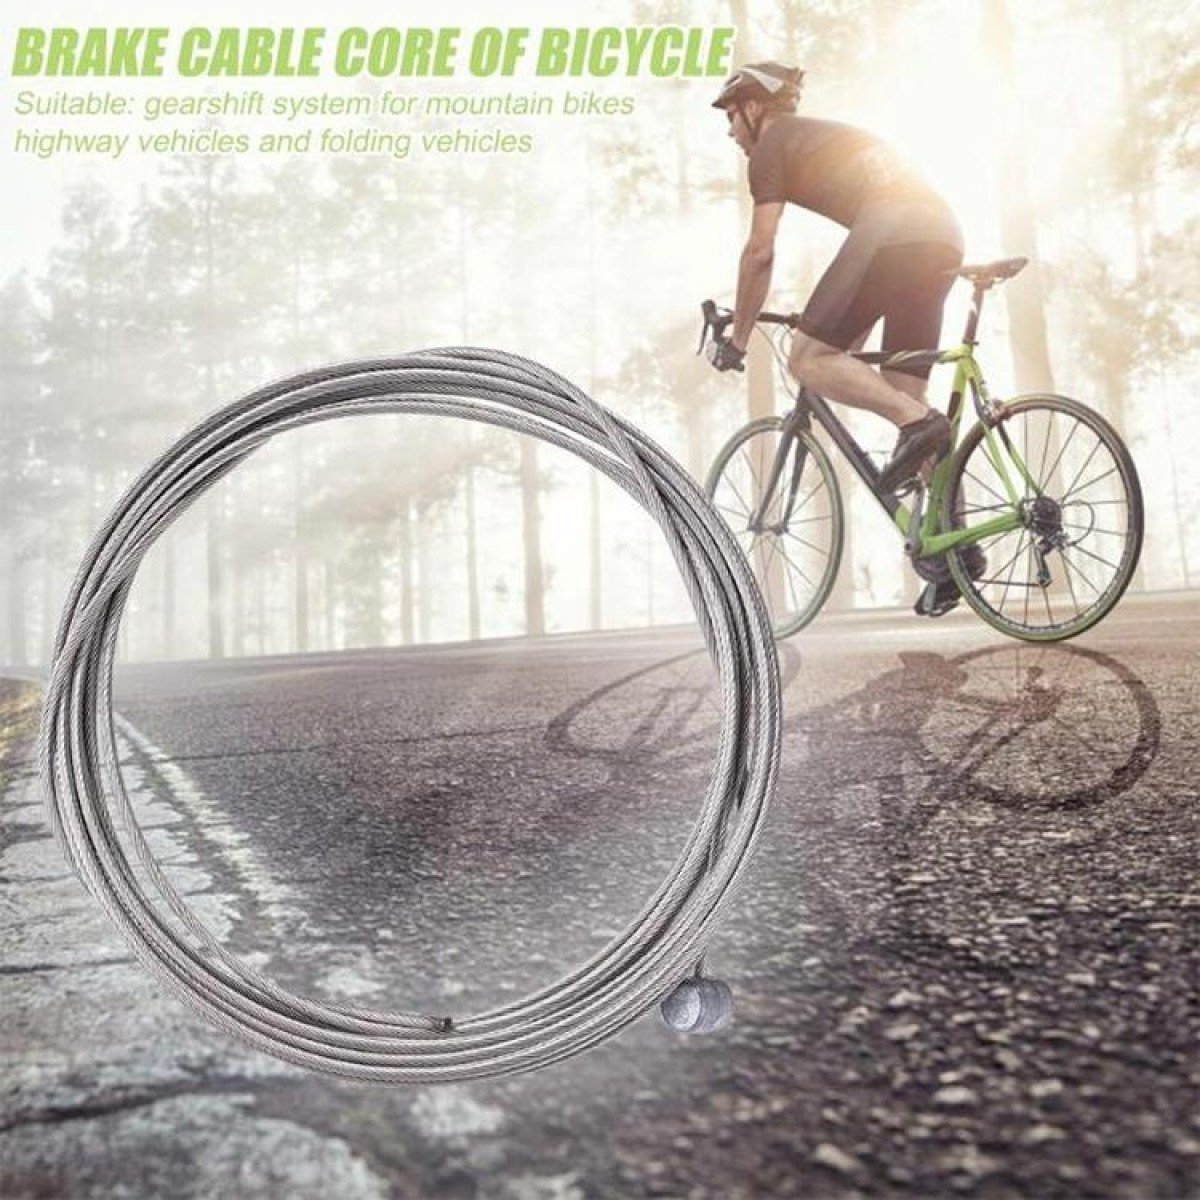 7 in 1 Cylindrical Head PVC Brake Cable Tube Set for Mountain Bike (Green)